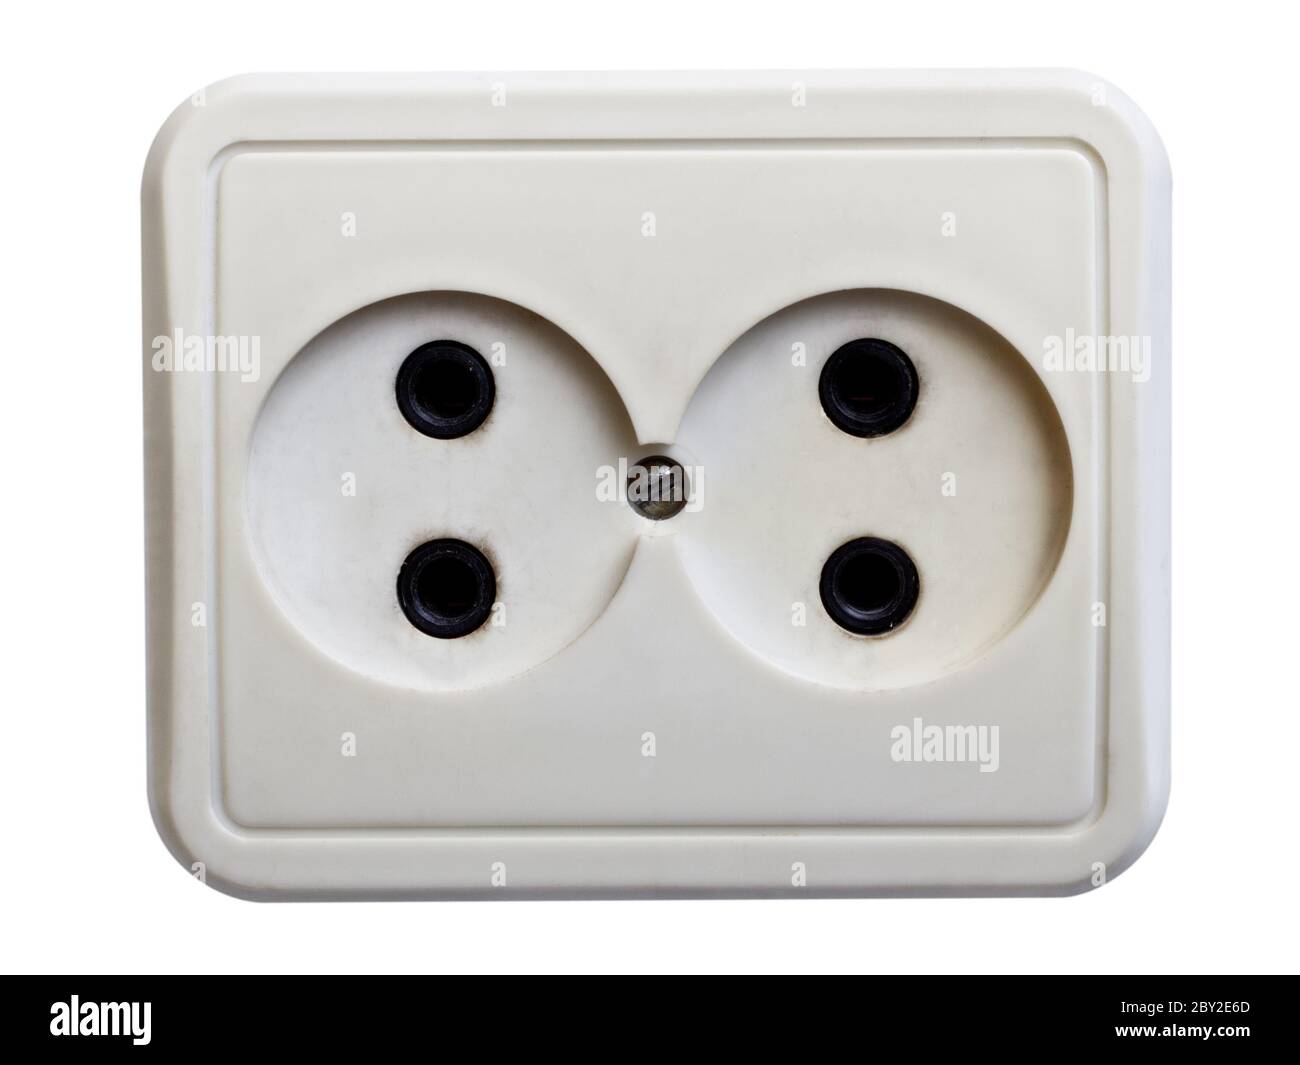 Casting plug Cut Out Stock Images & Pictures - Alamy